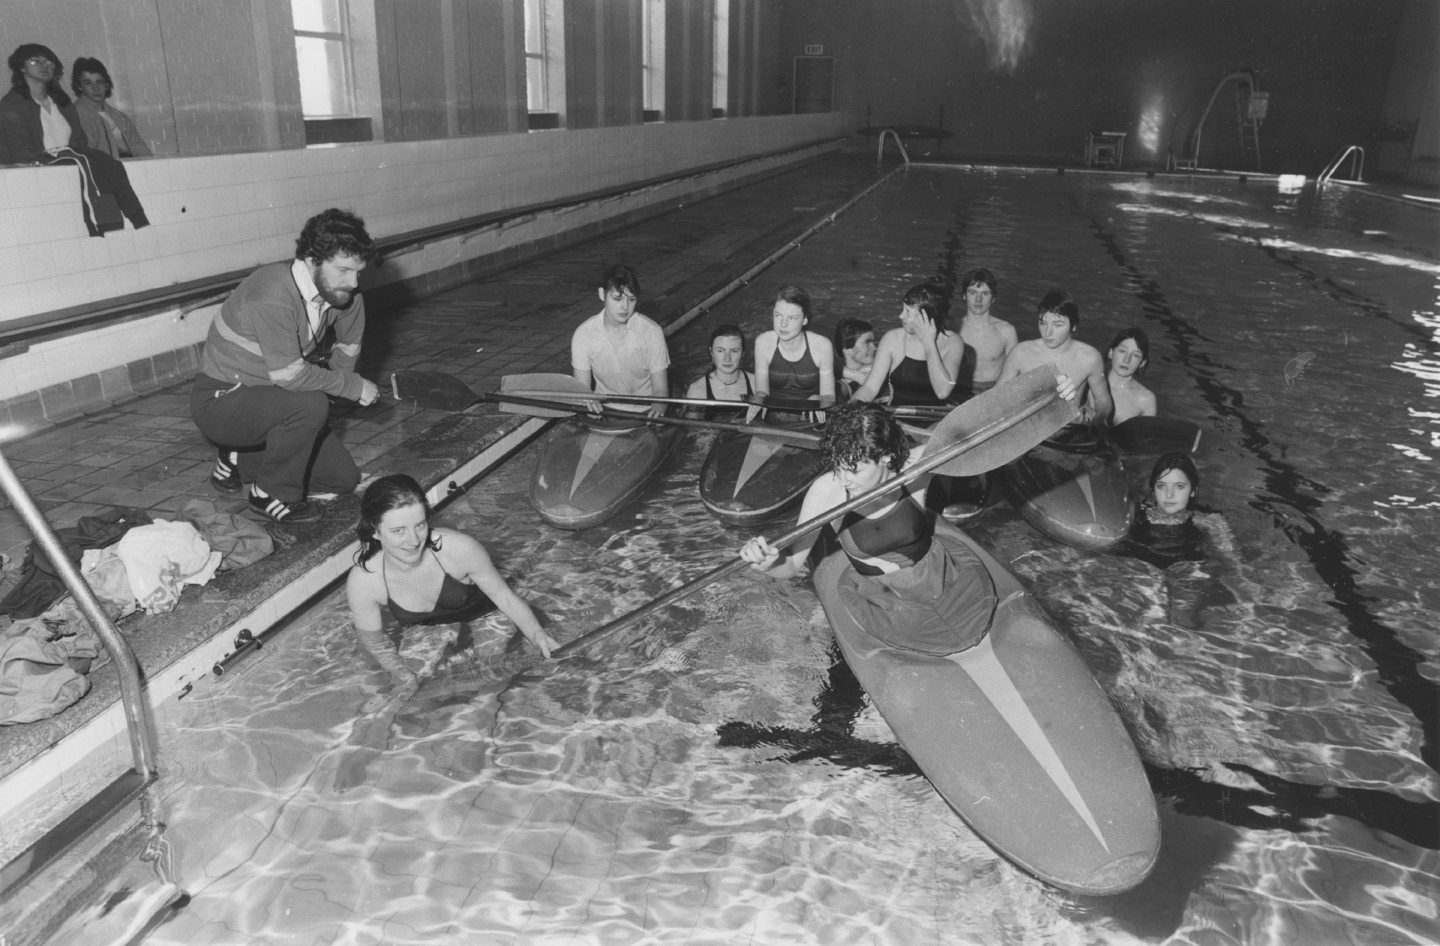 Pupils in kayaks in the pool